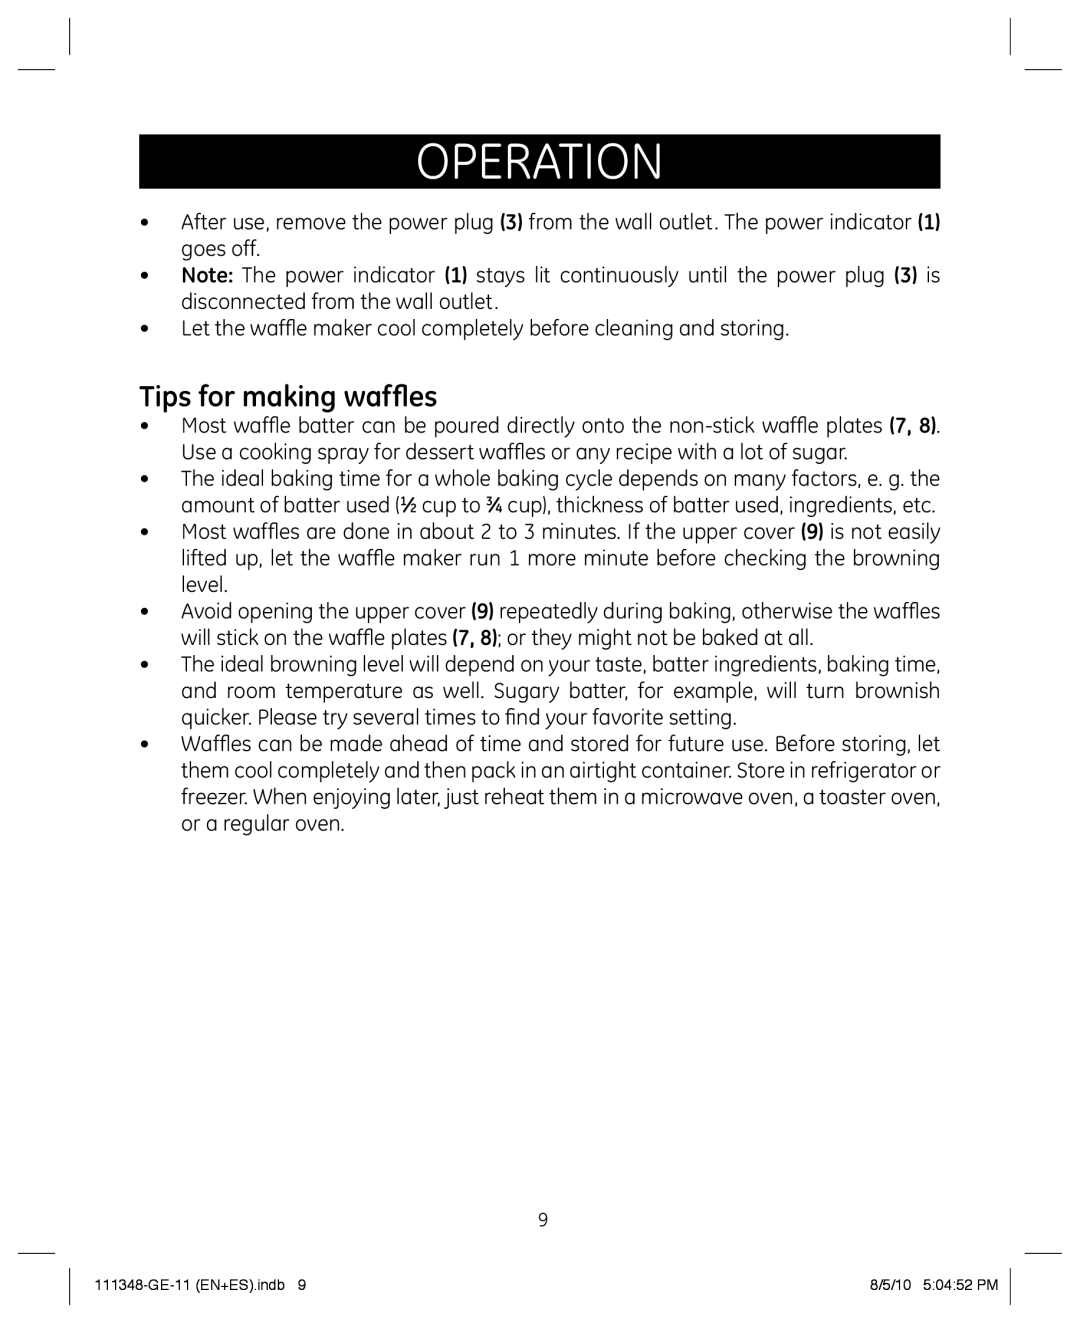 GE 898678 manual Tips for making waffles, operation 